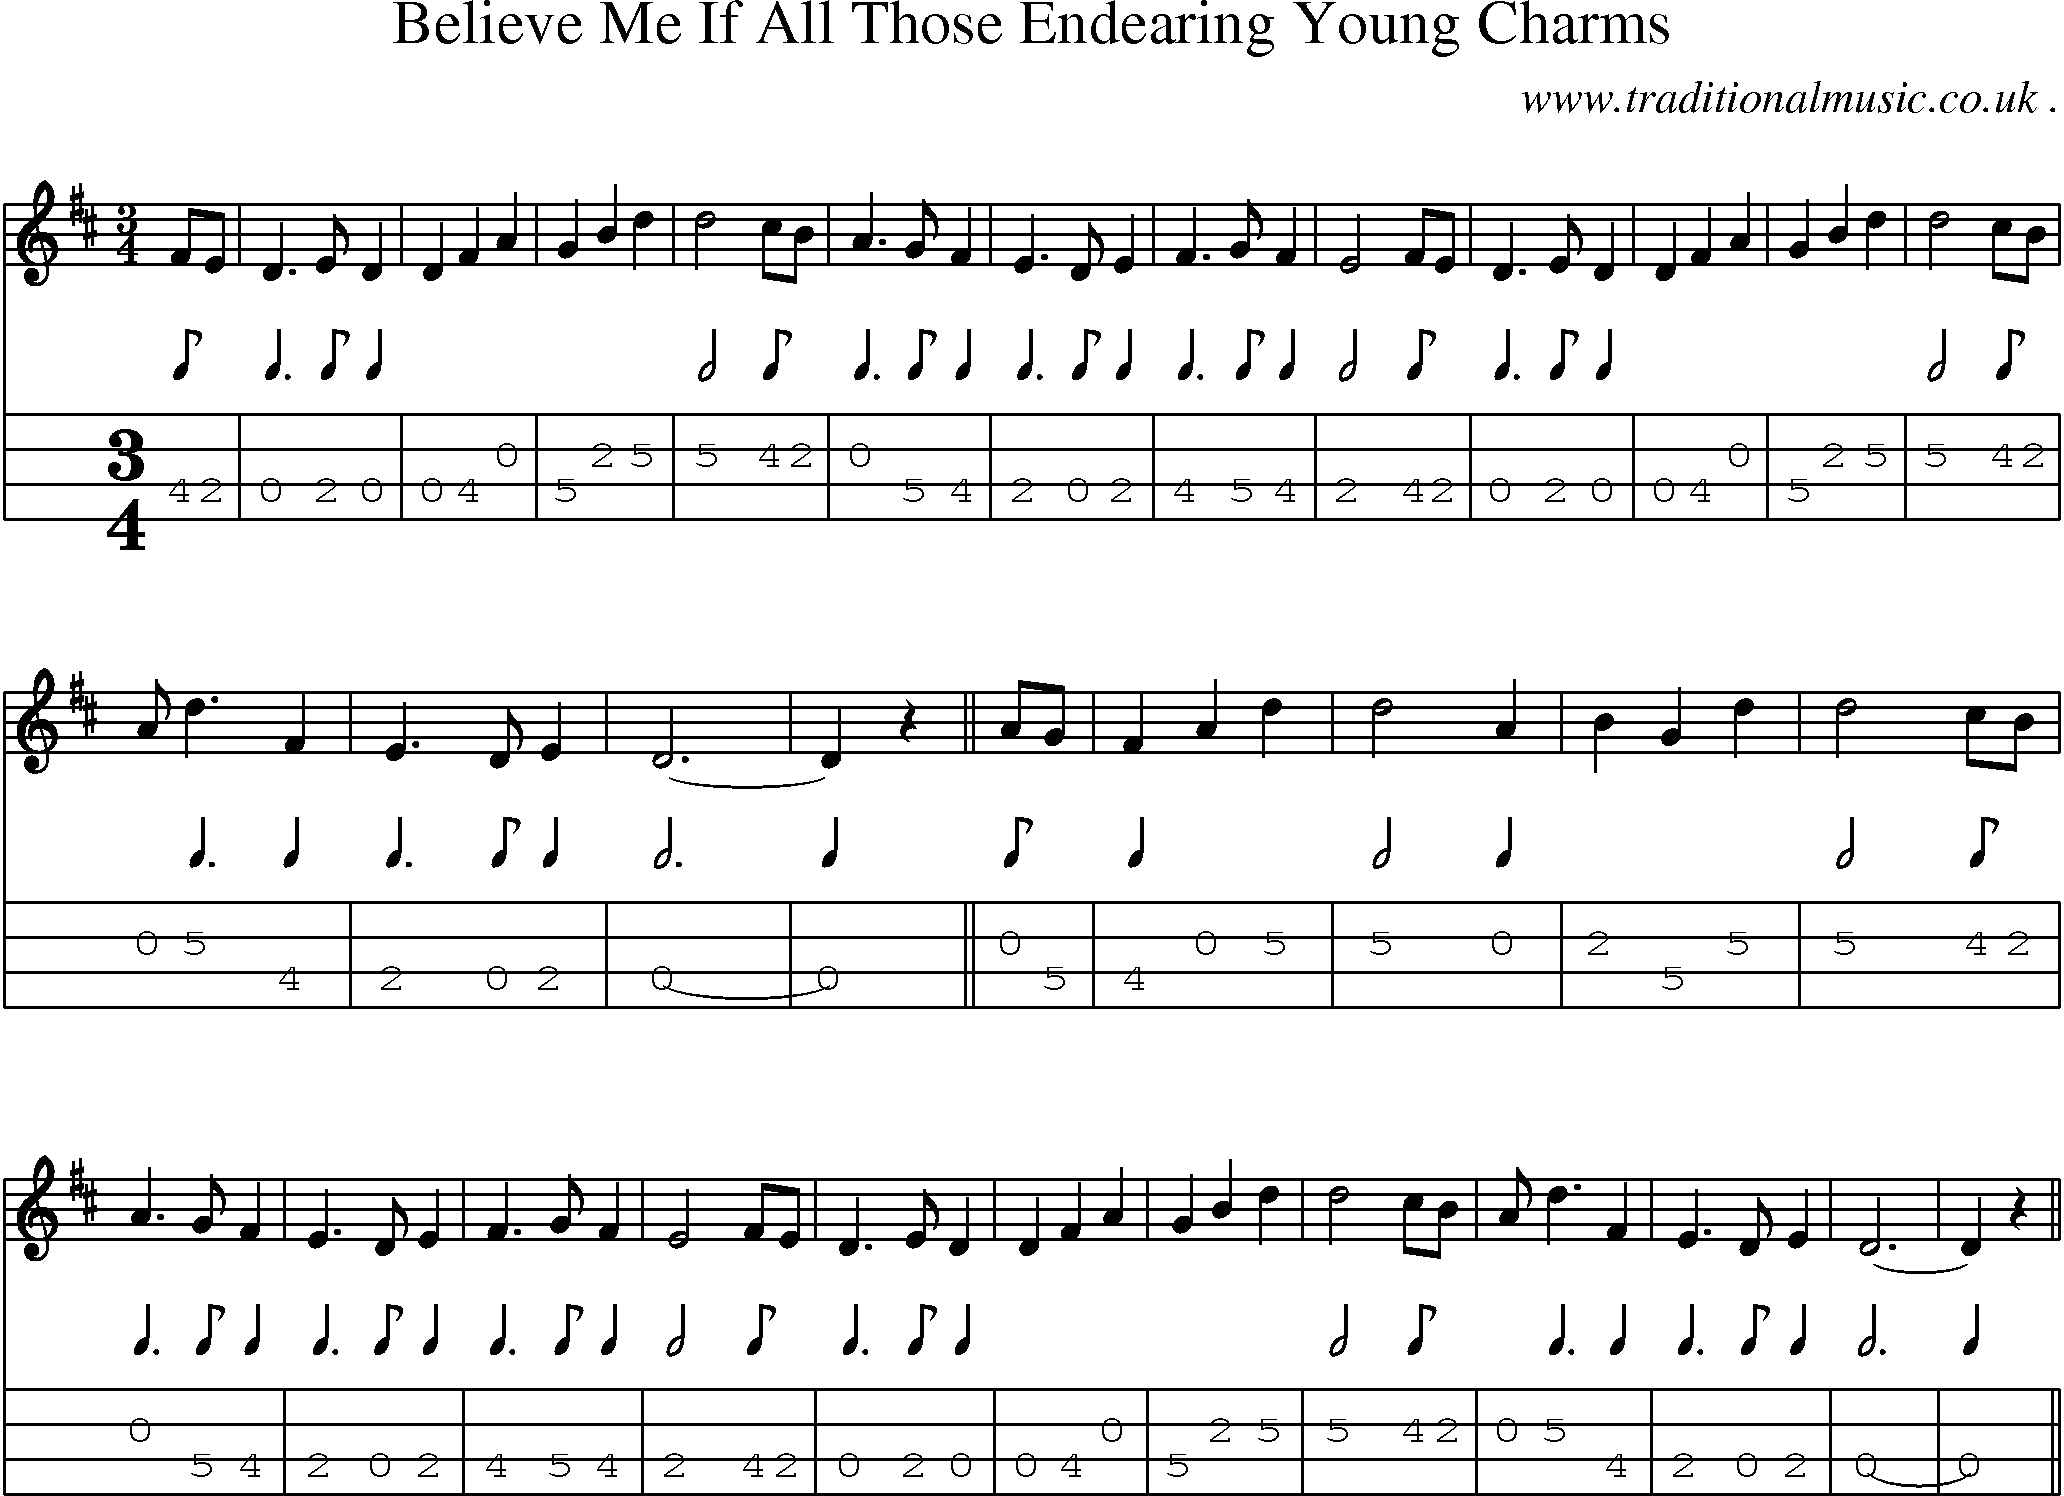 Sheet-Music and Mandolin Tabs for Believe Me If All Those Endearing Young Charms